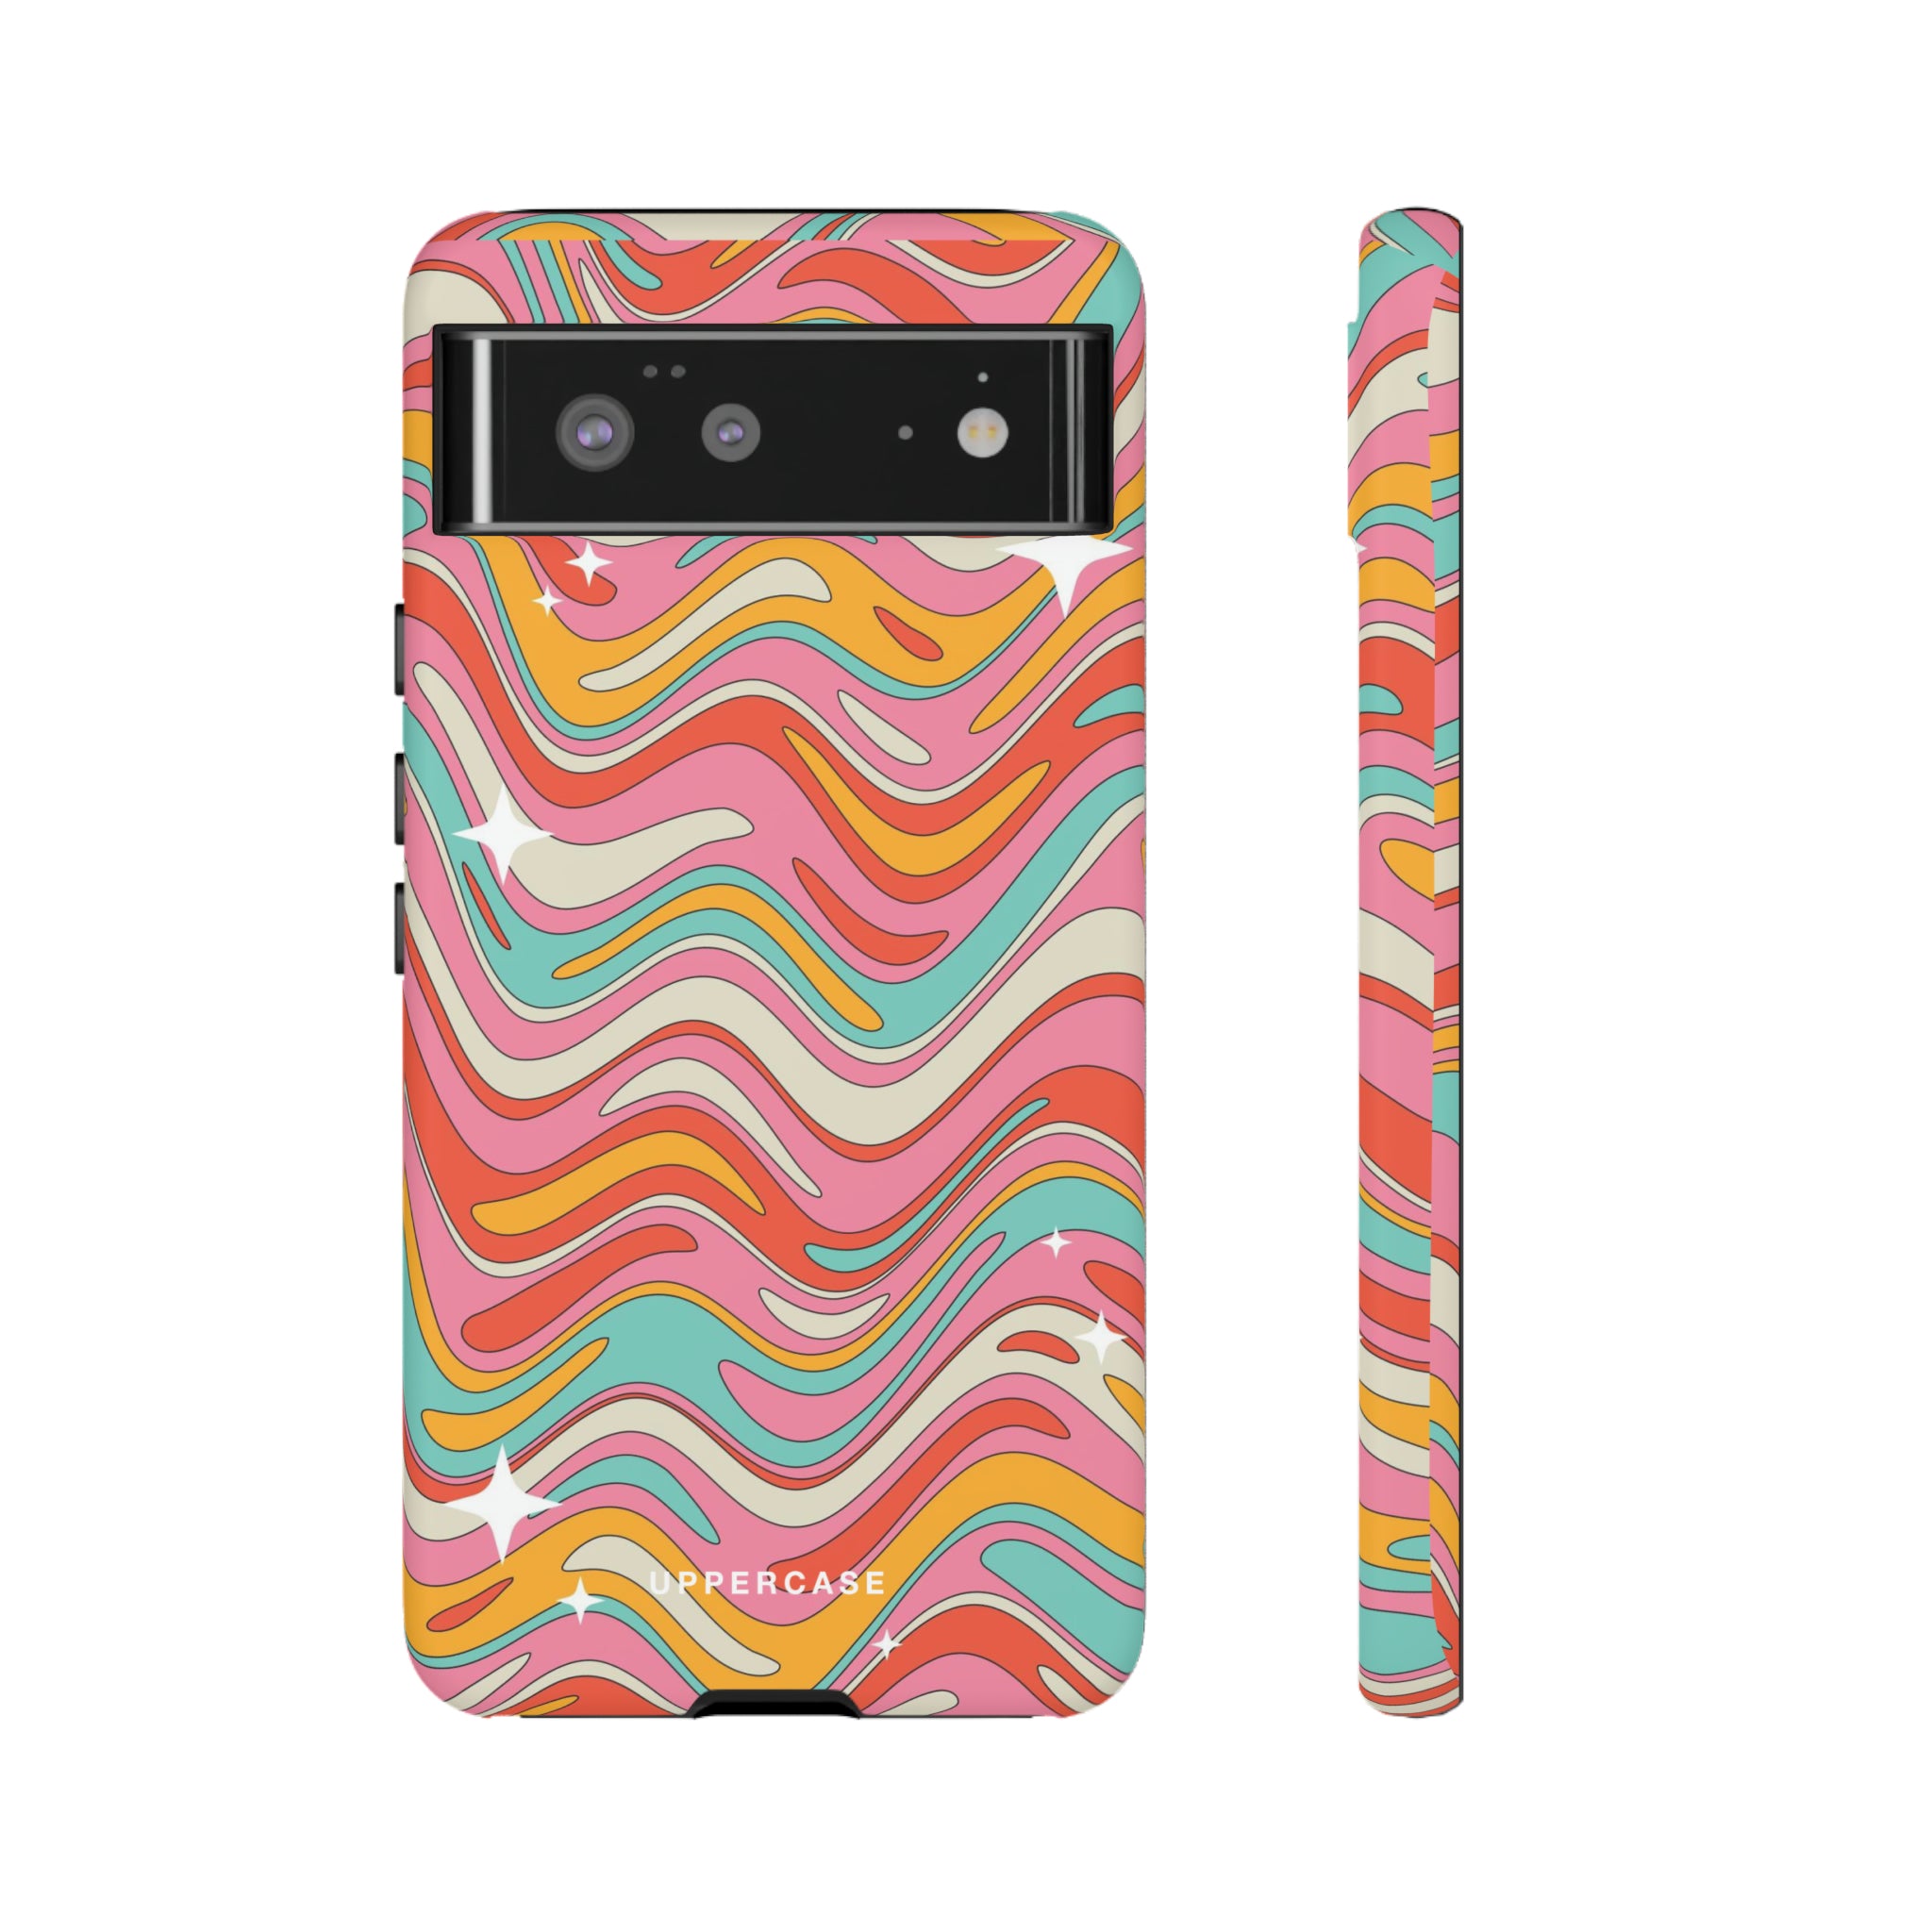 Stay Groovy - Strong Case